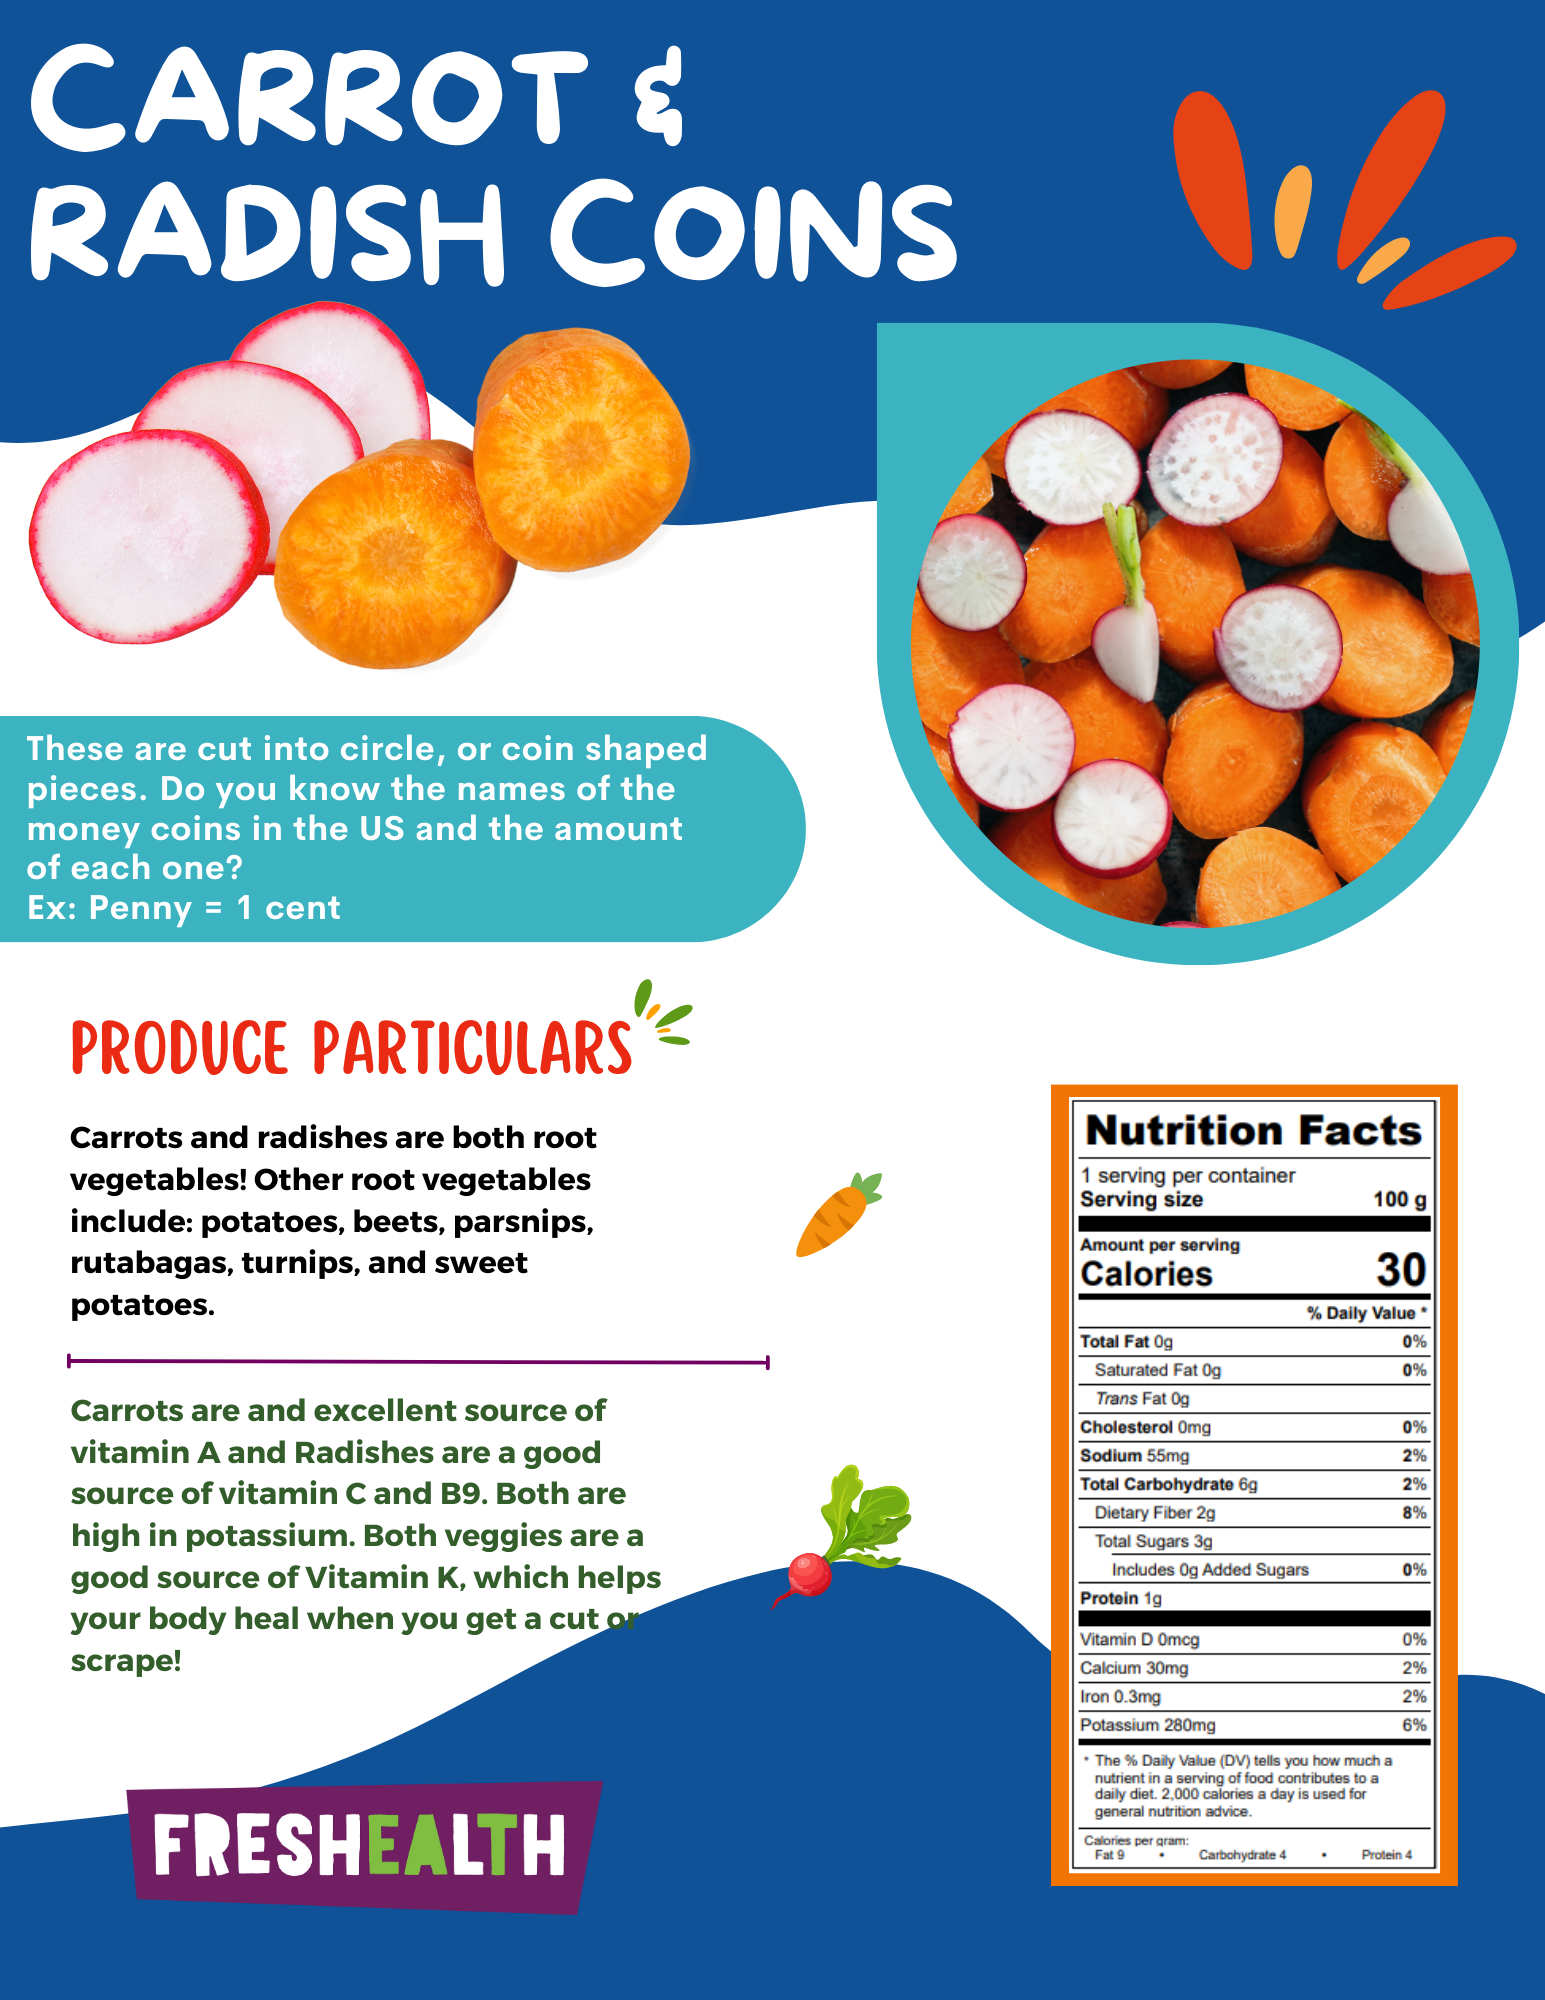 Carrot & Radish Coins.png